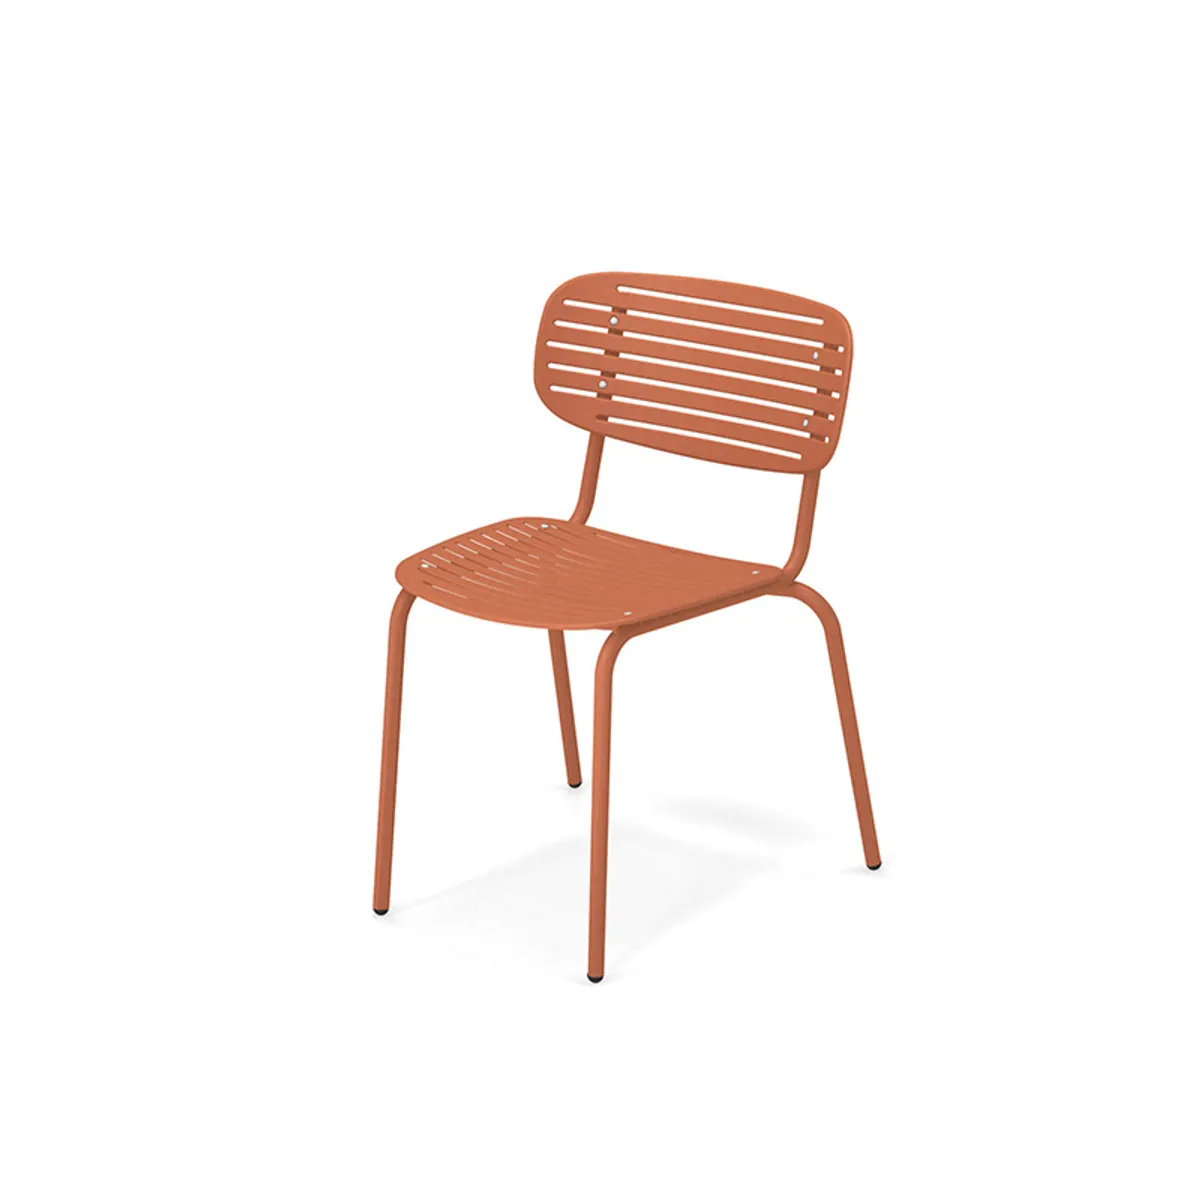 Mom Side Chair In Orange Metal Furniture For Outdoors